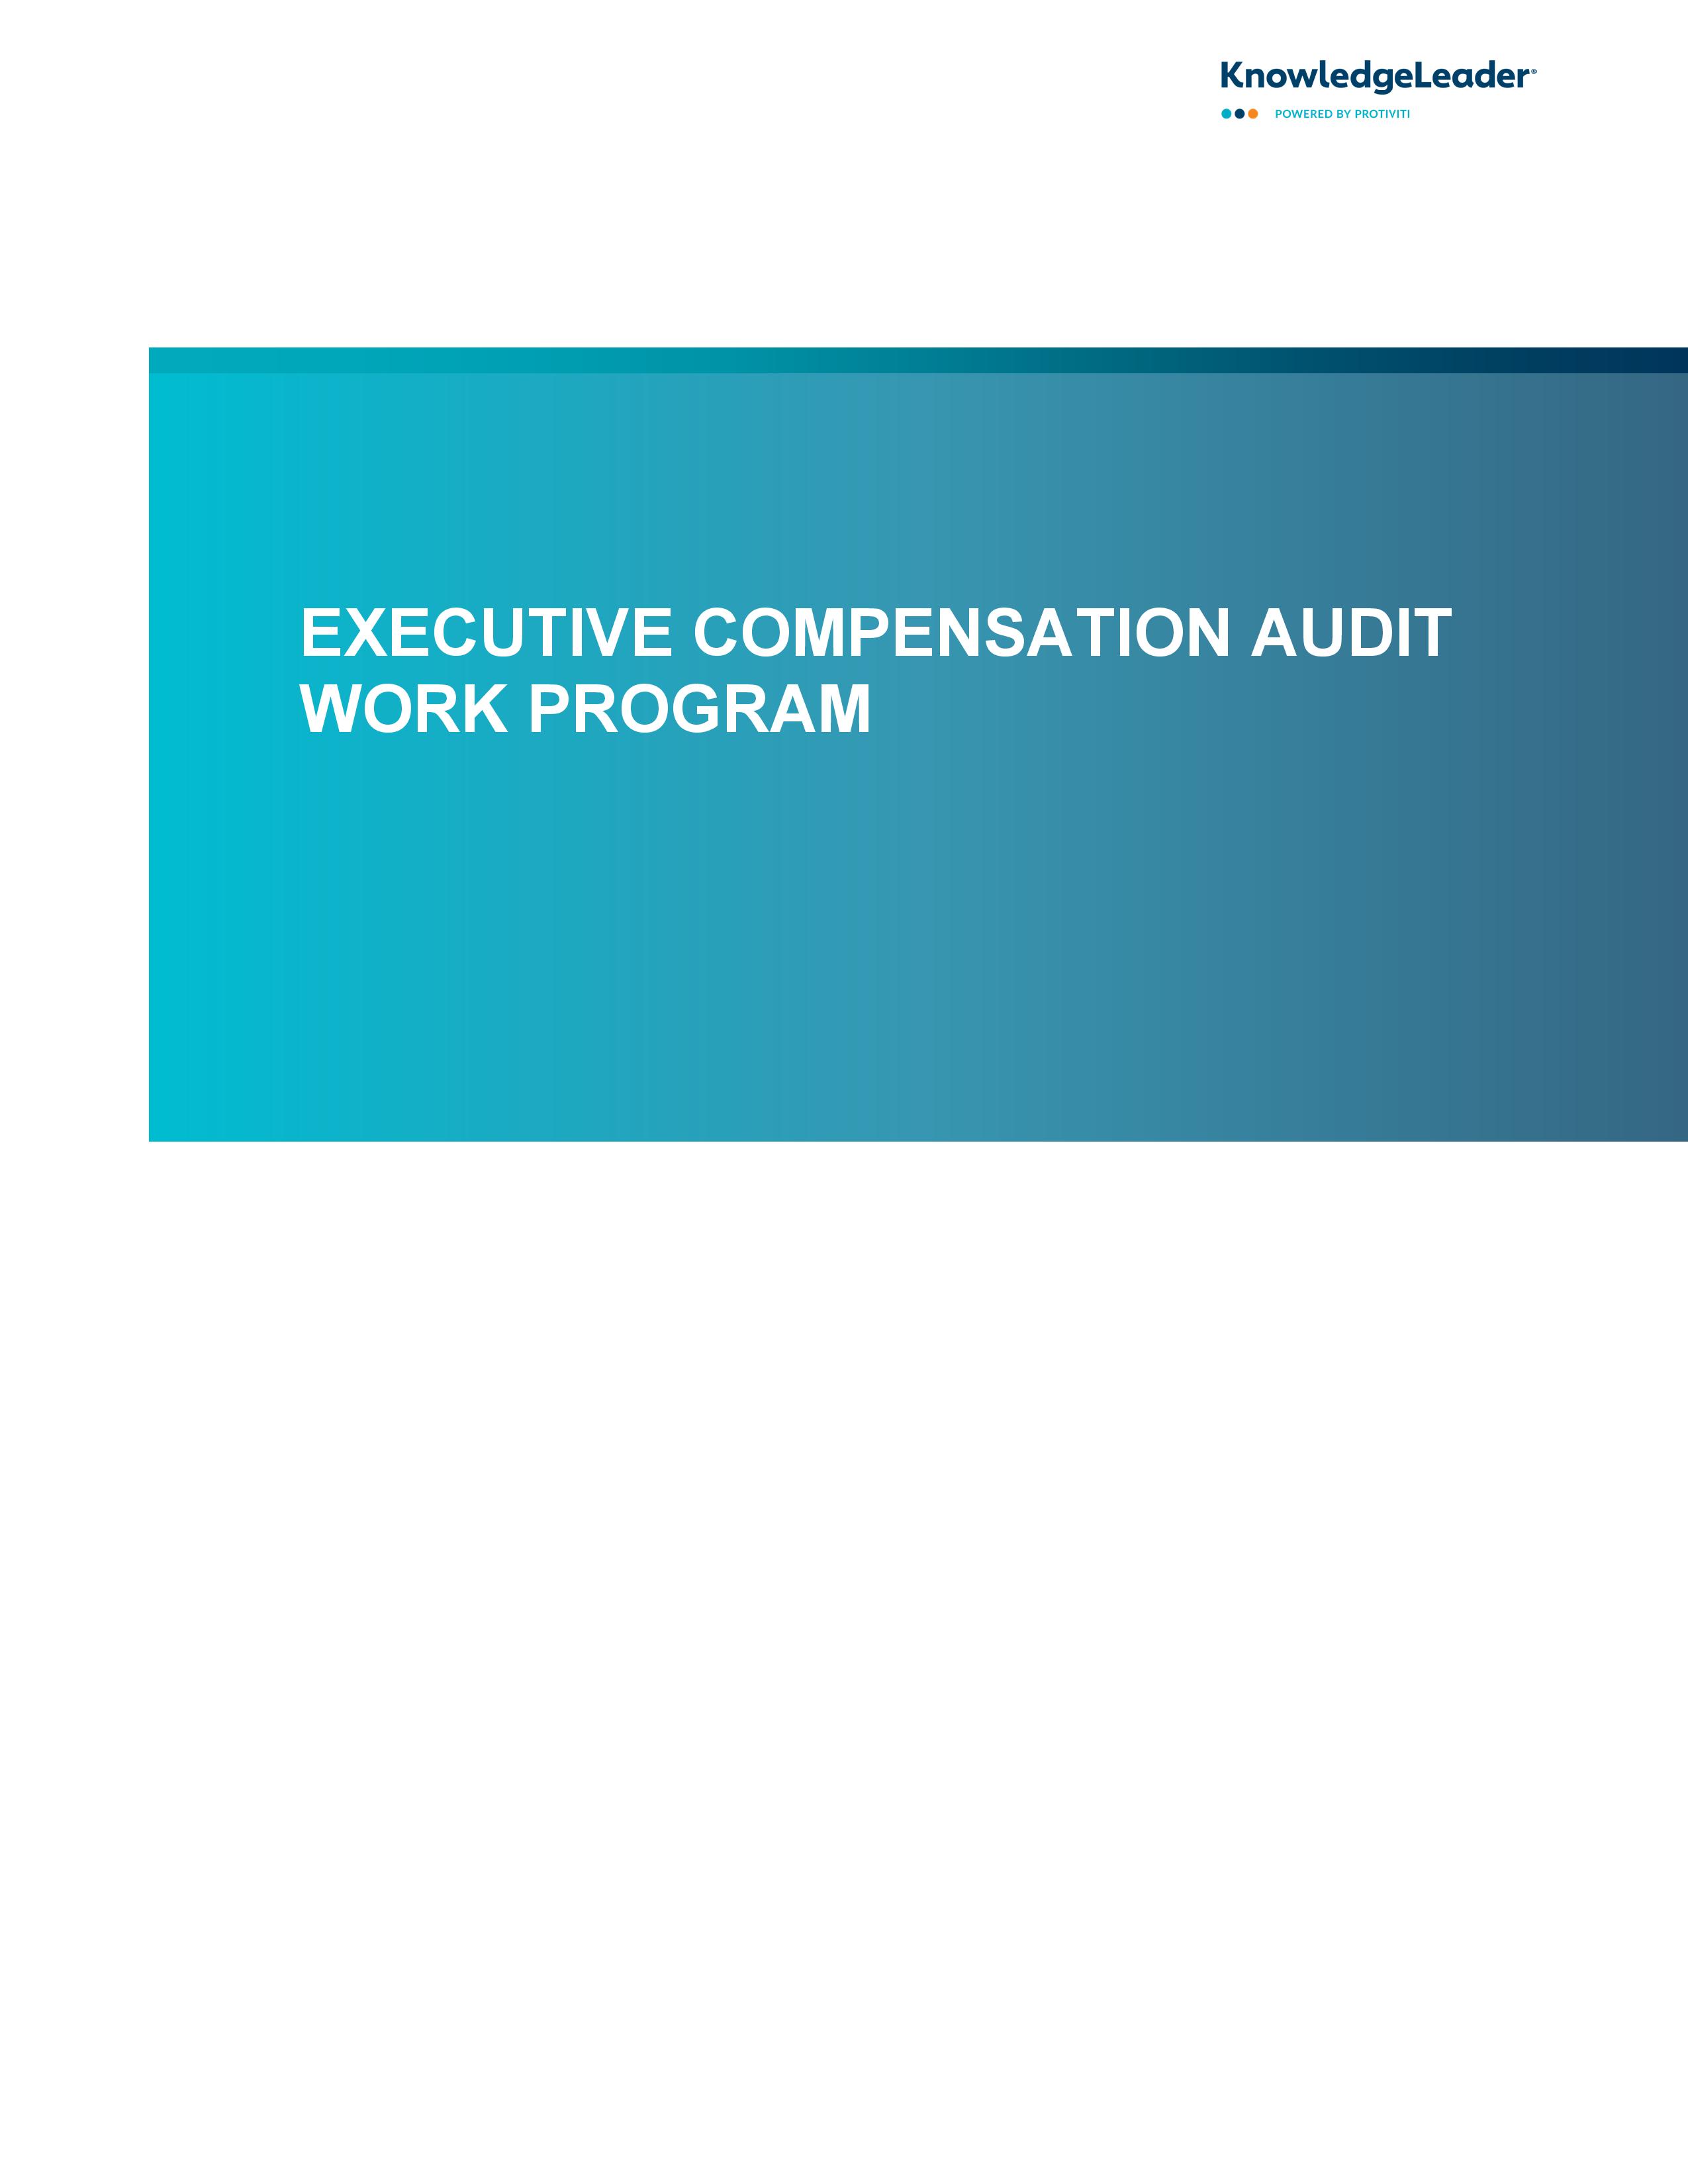 screenshot of the first page of Executive Compensation Audit Work Program